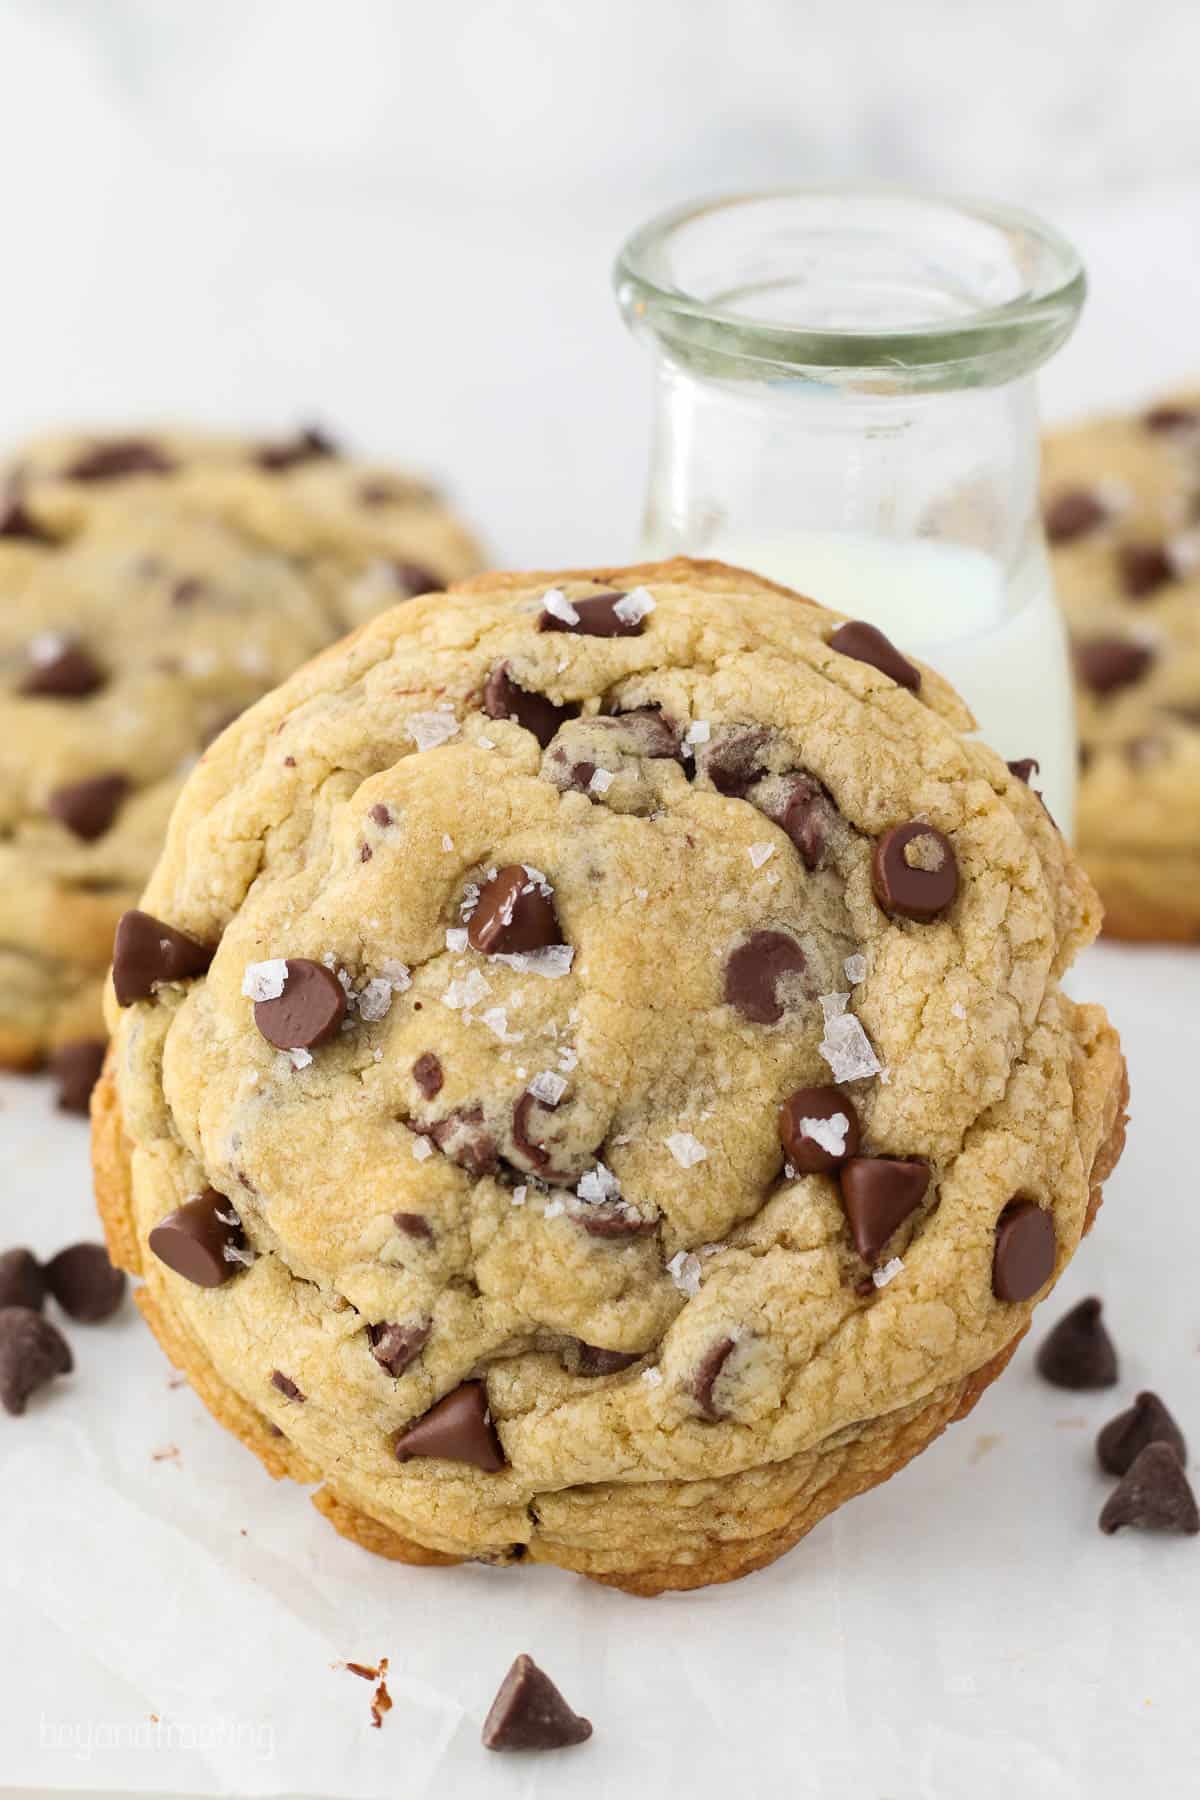 A giant chocolate chip cookie leaning against a jar of milk